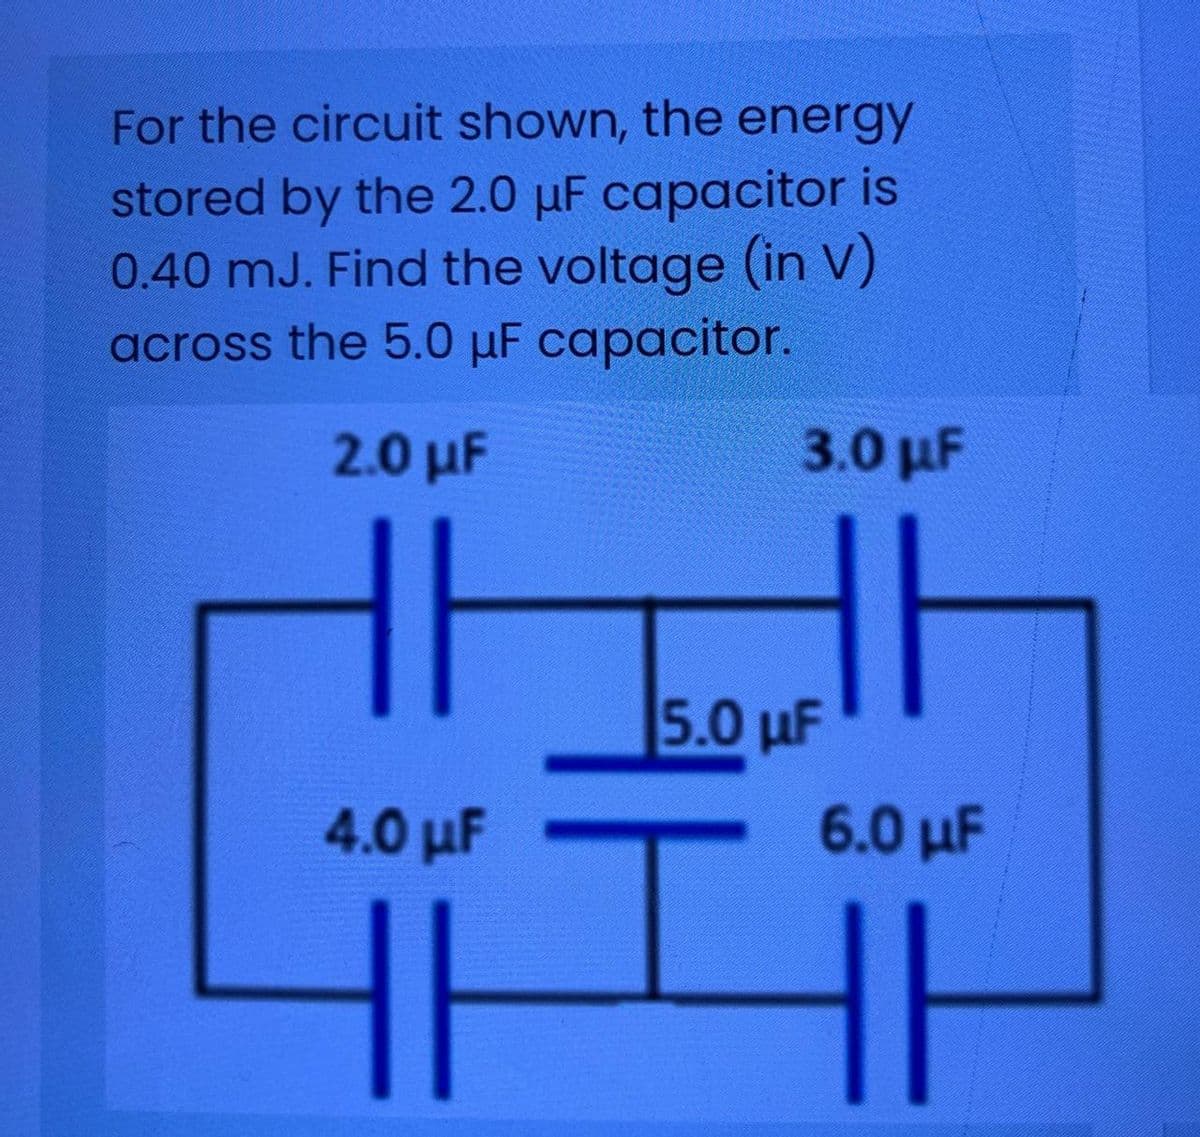 For the circuit shown, the energy
stored by the 2.0 µF capacitor is
0.40 mJ. Find the voltage (in V)
across the 5.0 µF capacitor.
2.0 μ
3.0 μF
5.0 uF
4.0 μF
6.0 µF
